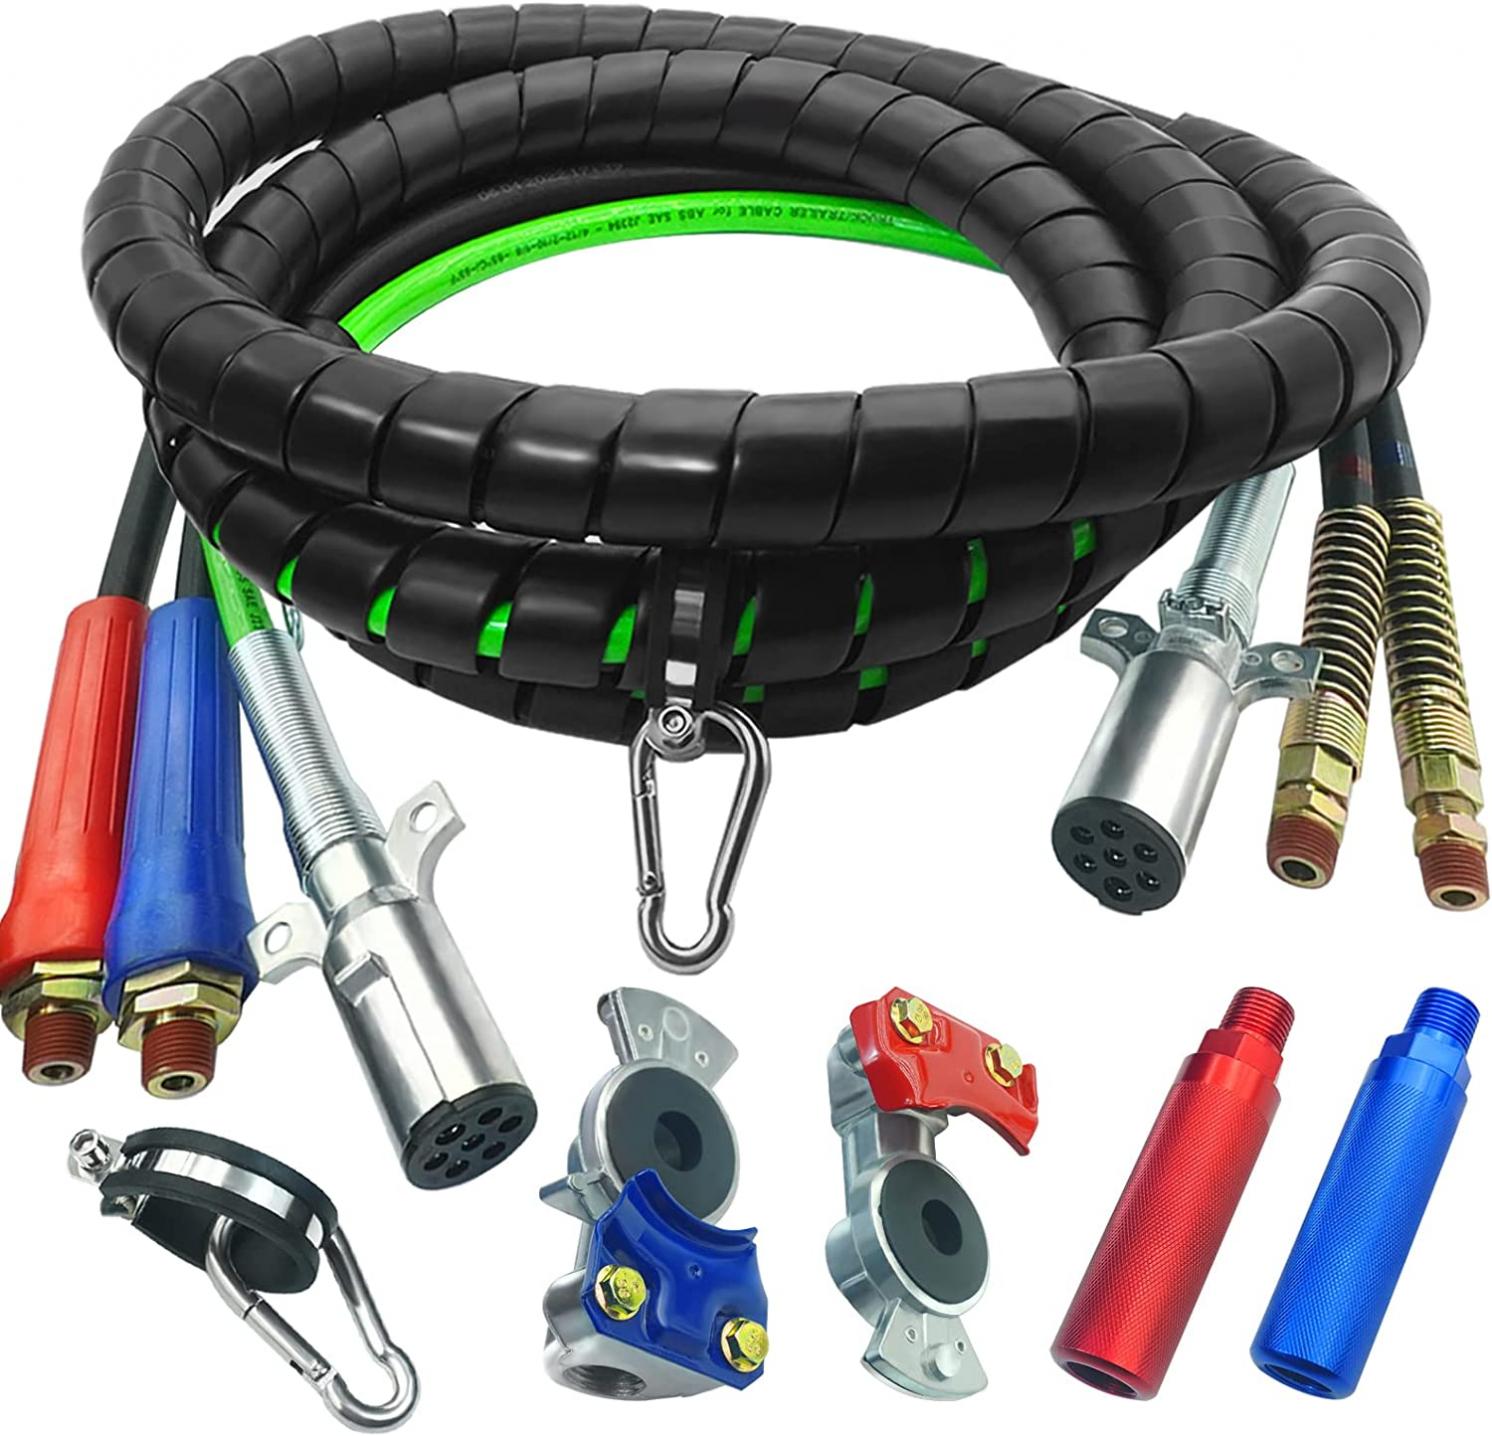 15 ft 3 in 1 Semi Truck Air Line Kit, Air Lines for Tractor Trailer Truck Parts with Rubber Air Hose Assembly,7 Way ABS Electrical Cable, Peterbilt Air Power Line TR Trailer with Handle Grip Glad